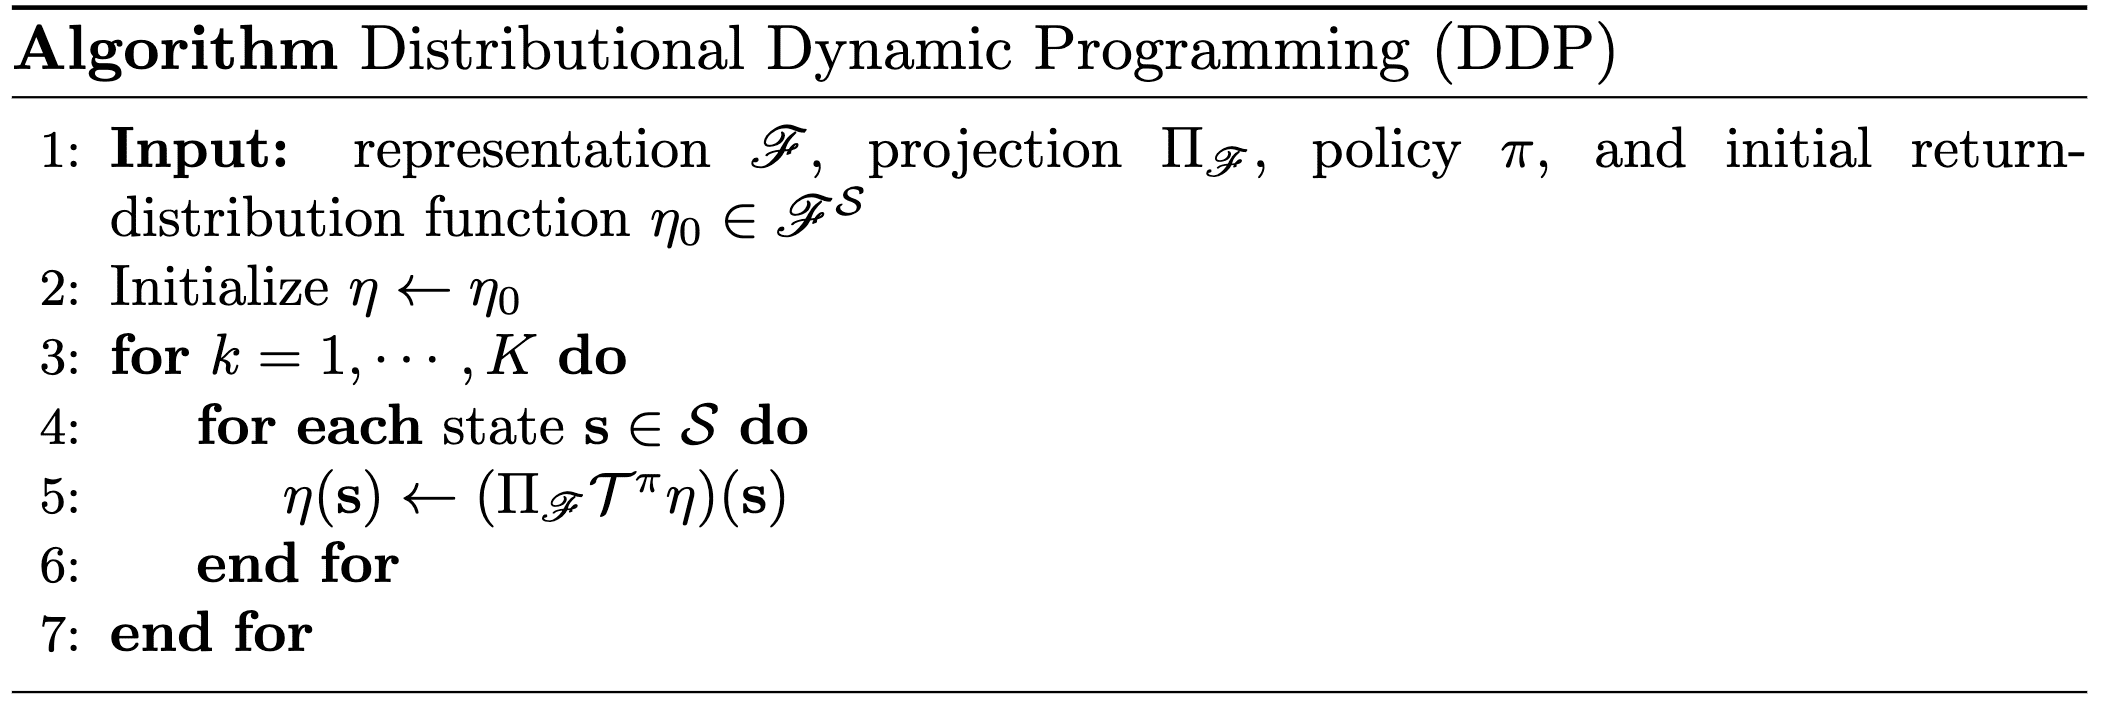 The pseudocode of Distributional Dynamic Programming